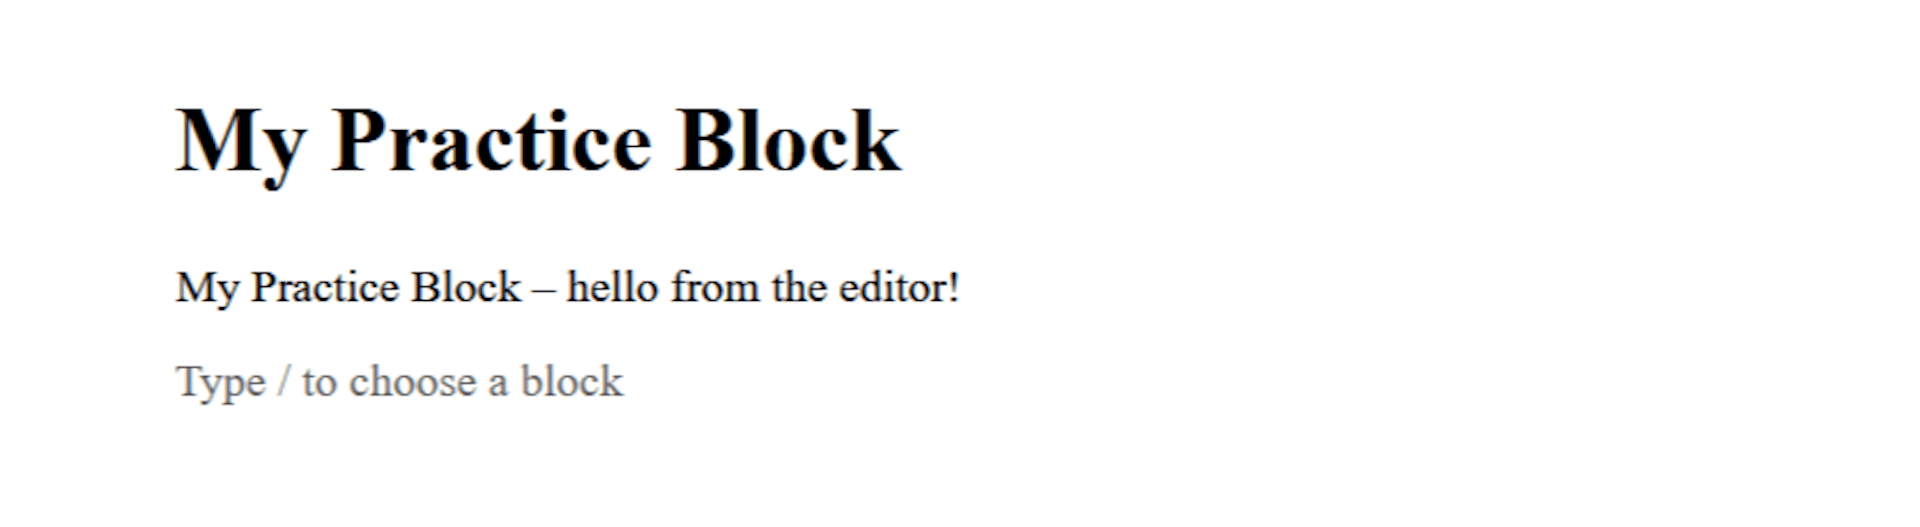 WP Block message in the Editor